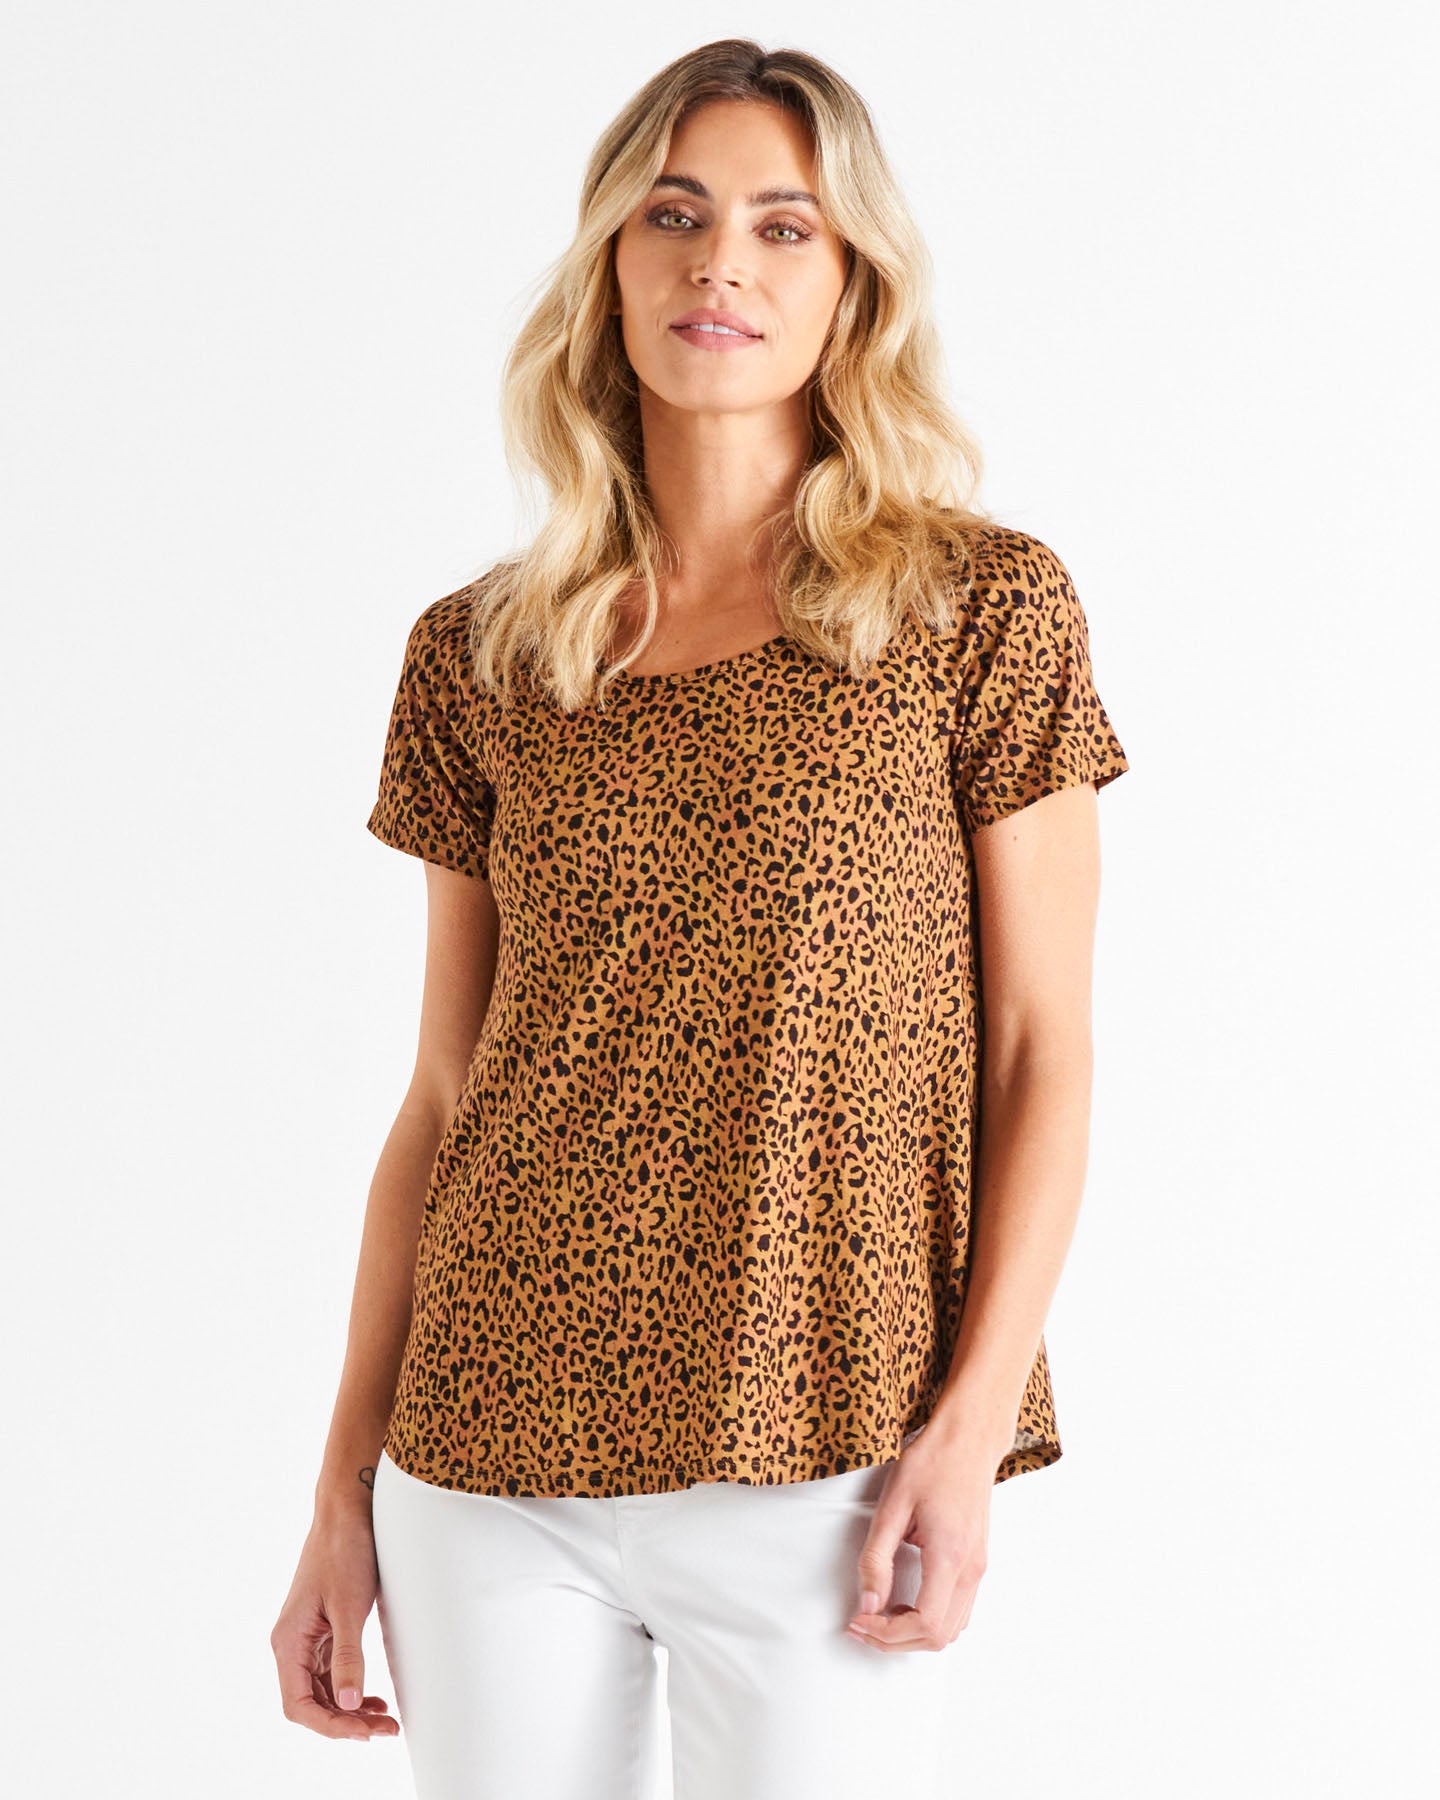 Holland Stretchy Scoop Neck Basic Tee - Wild Leopard Print